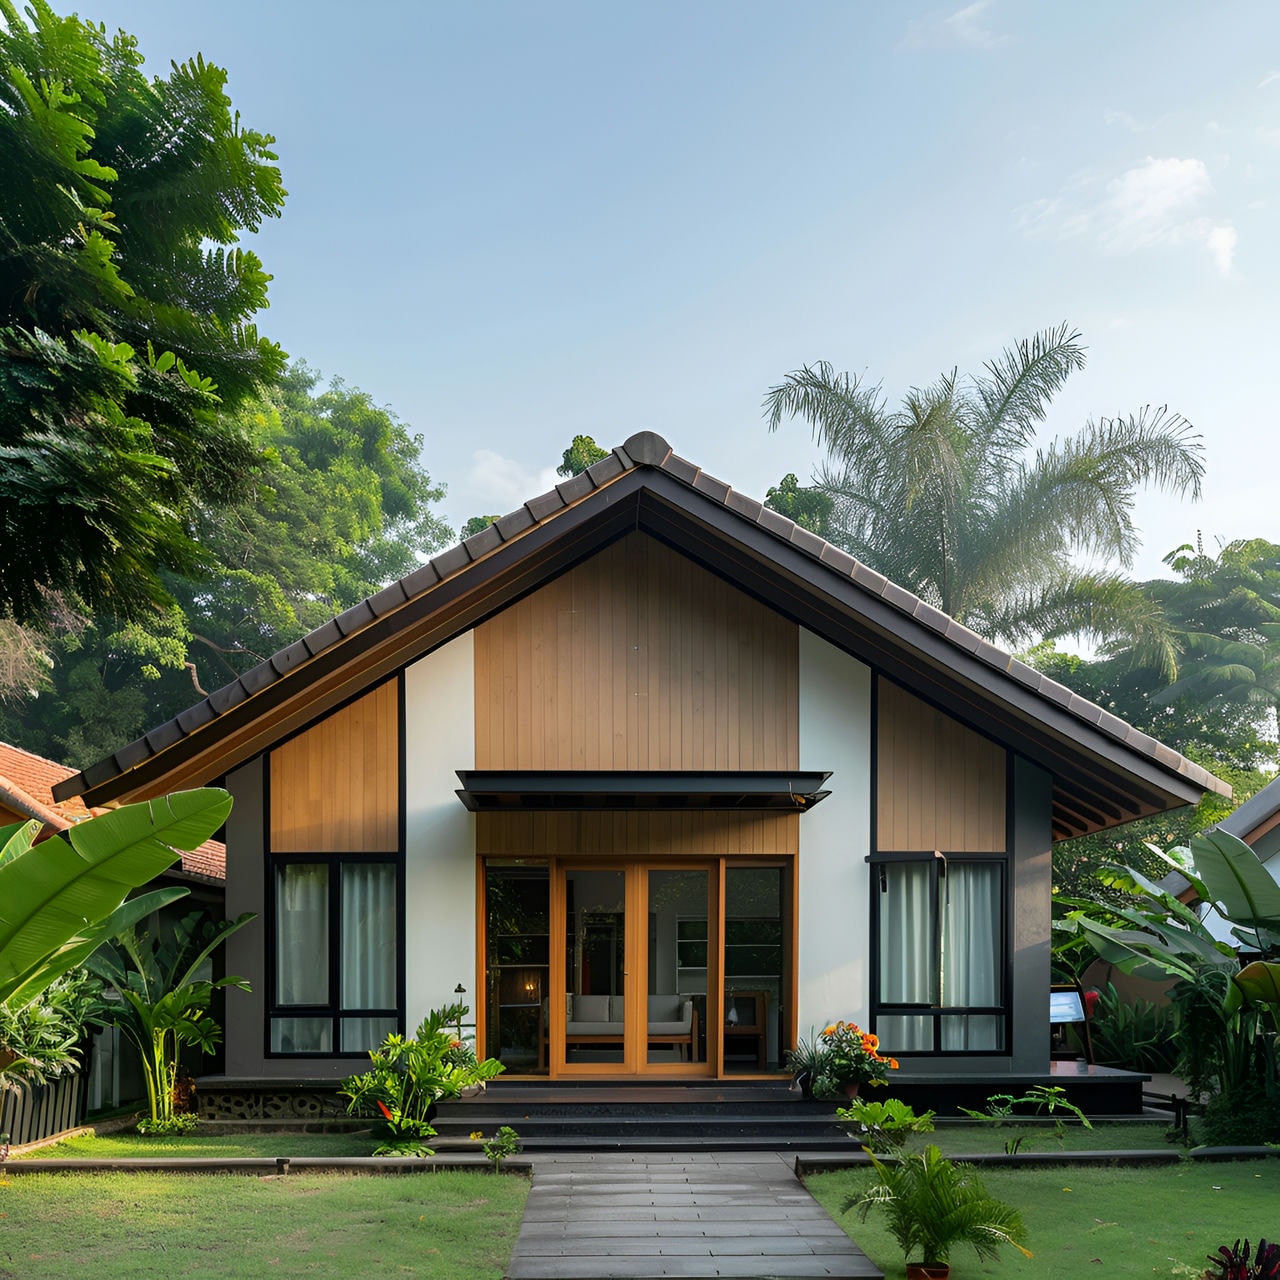 Bungalow: architecture, history, sustainability, materials and typical prices